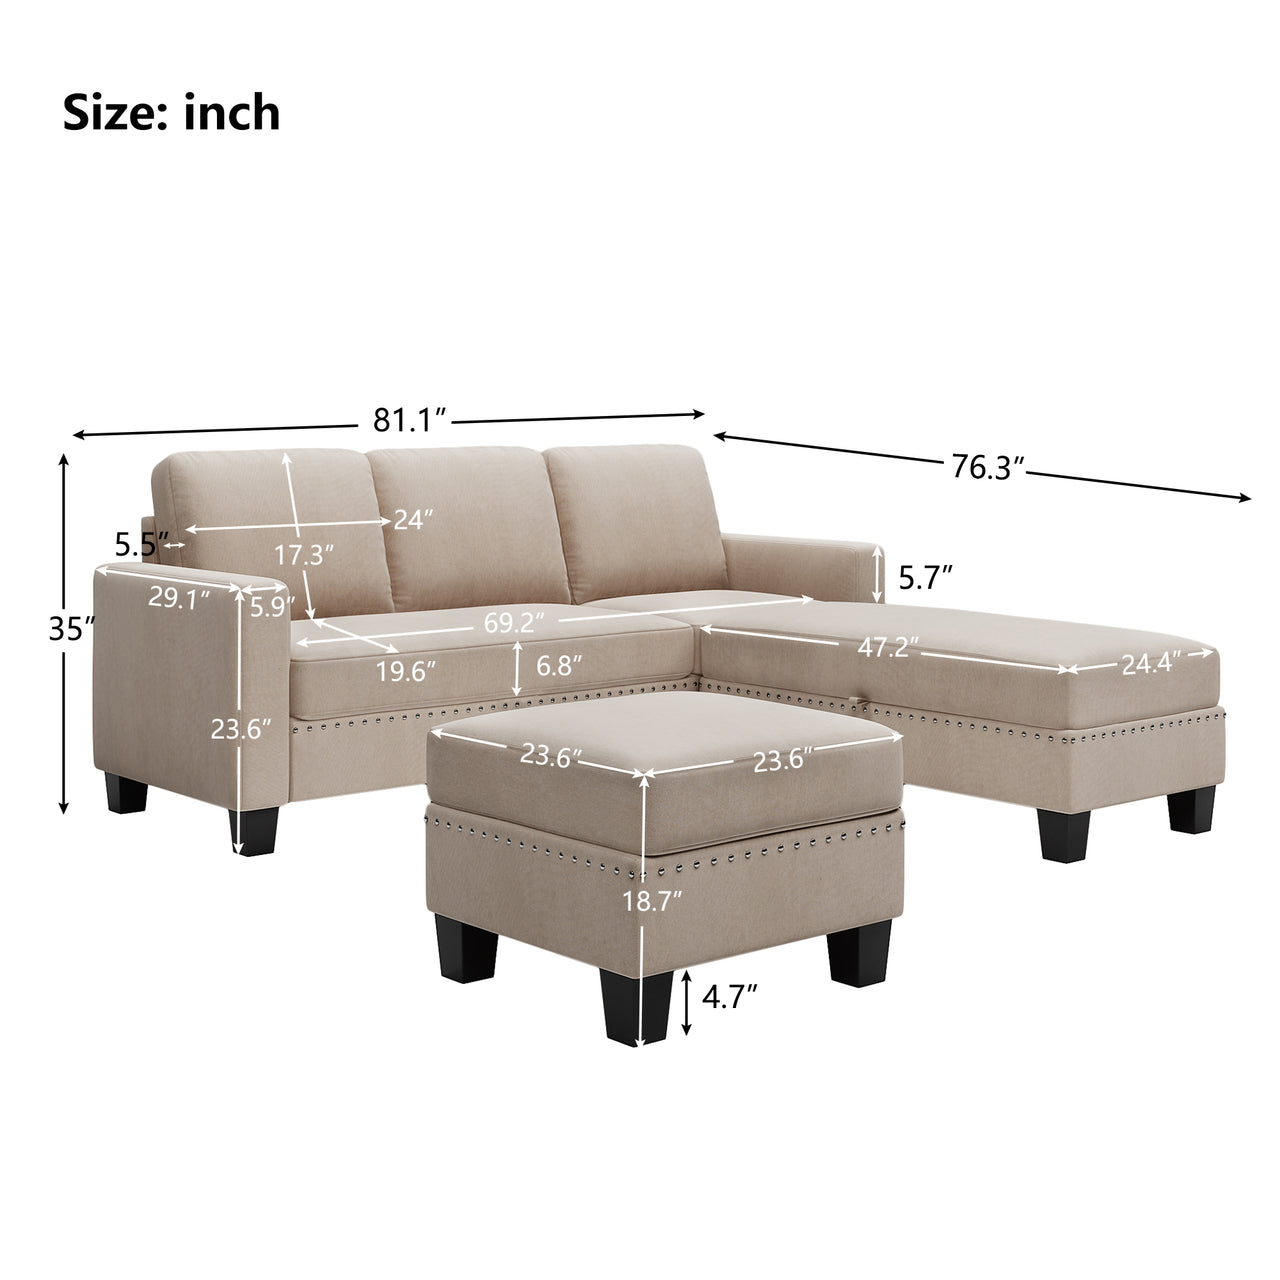 [New]  81.1*76.3*35& Nailheaded Textured Fabric 3 pieces Sofa Set, L Sectional Sofa with Ottoman,Reversible Storage Chaise,Warm Grey